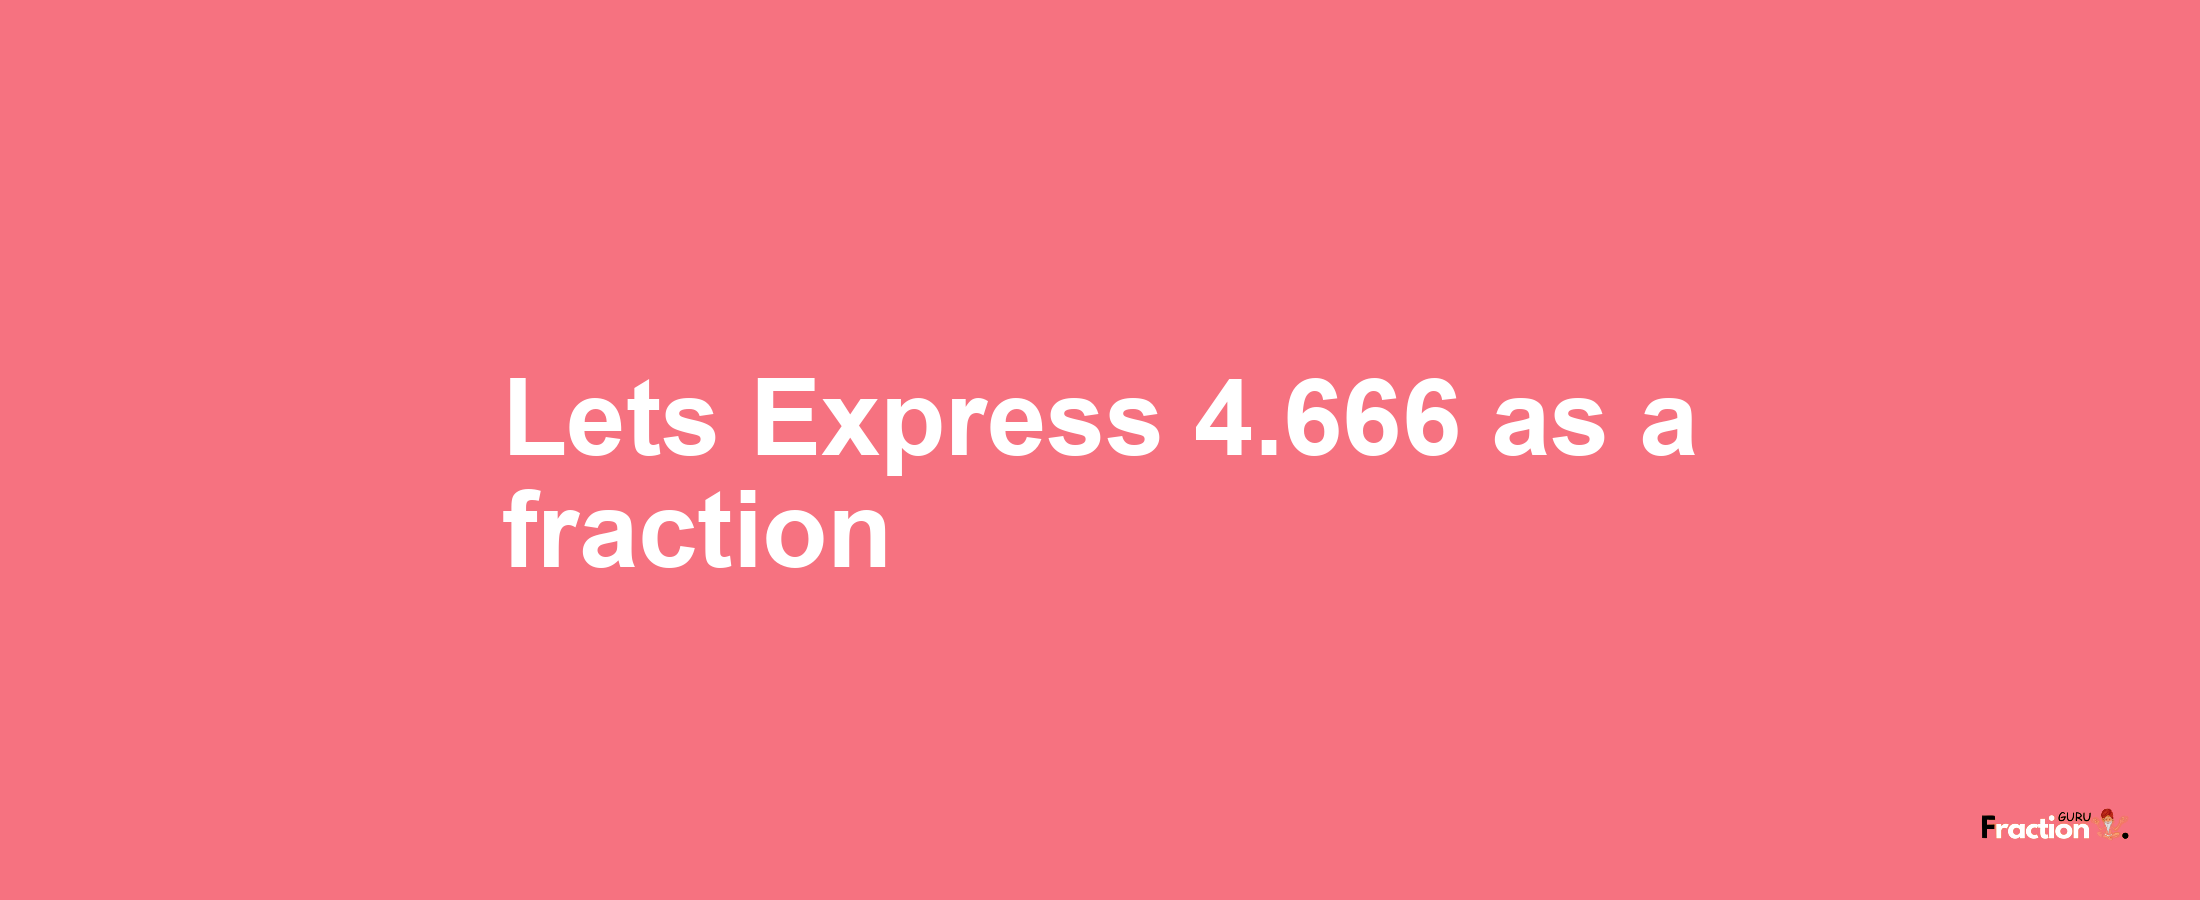 Lets Express 4.666 as afraction